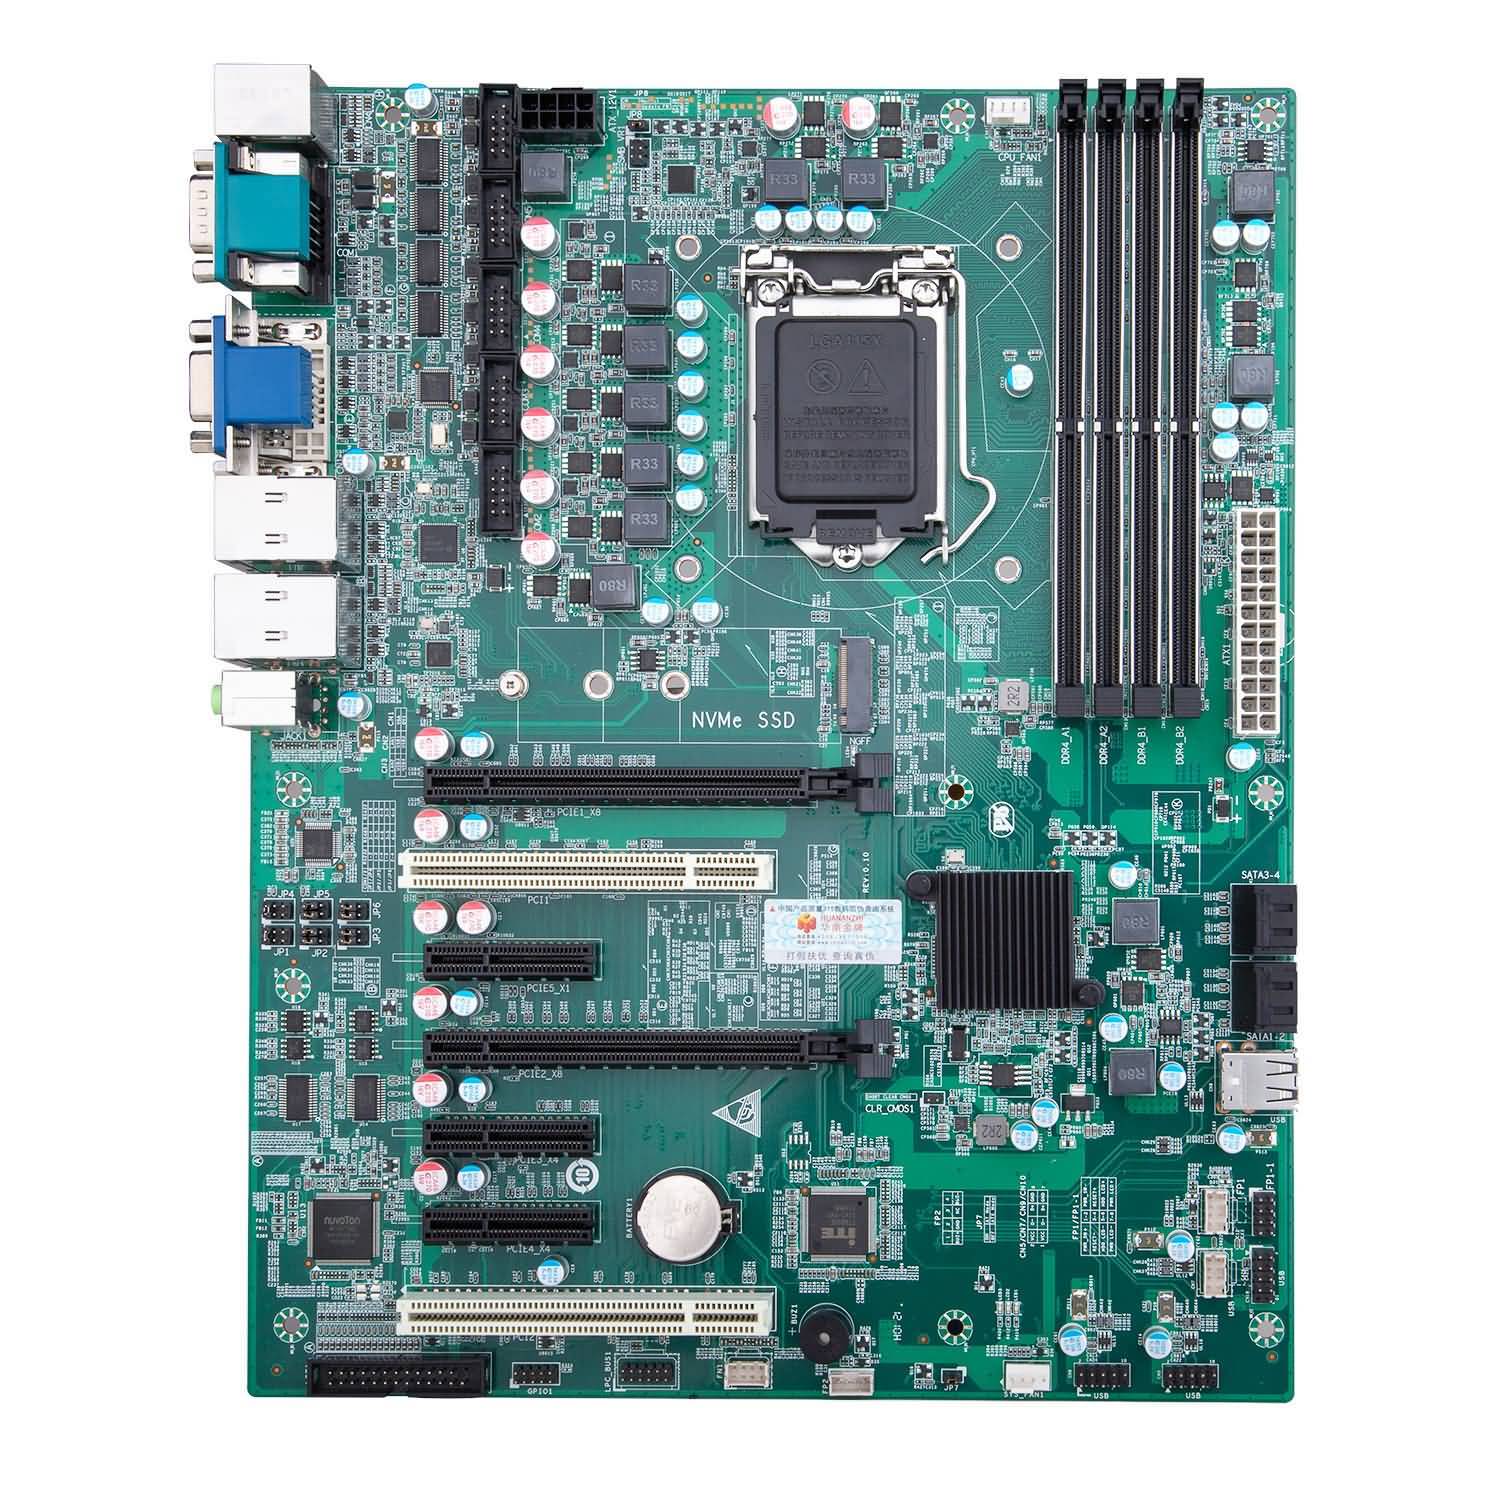 Download Huananzhi Q170 Motherboard Free